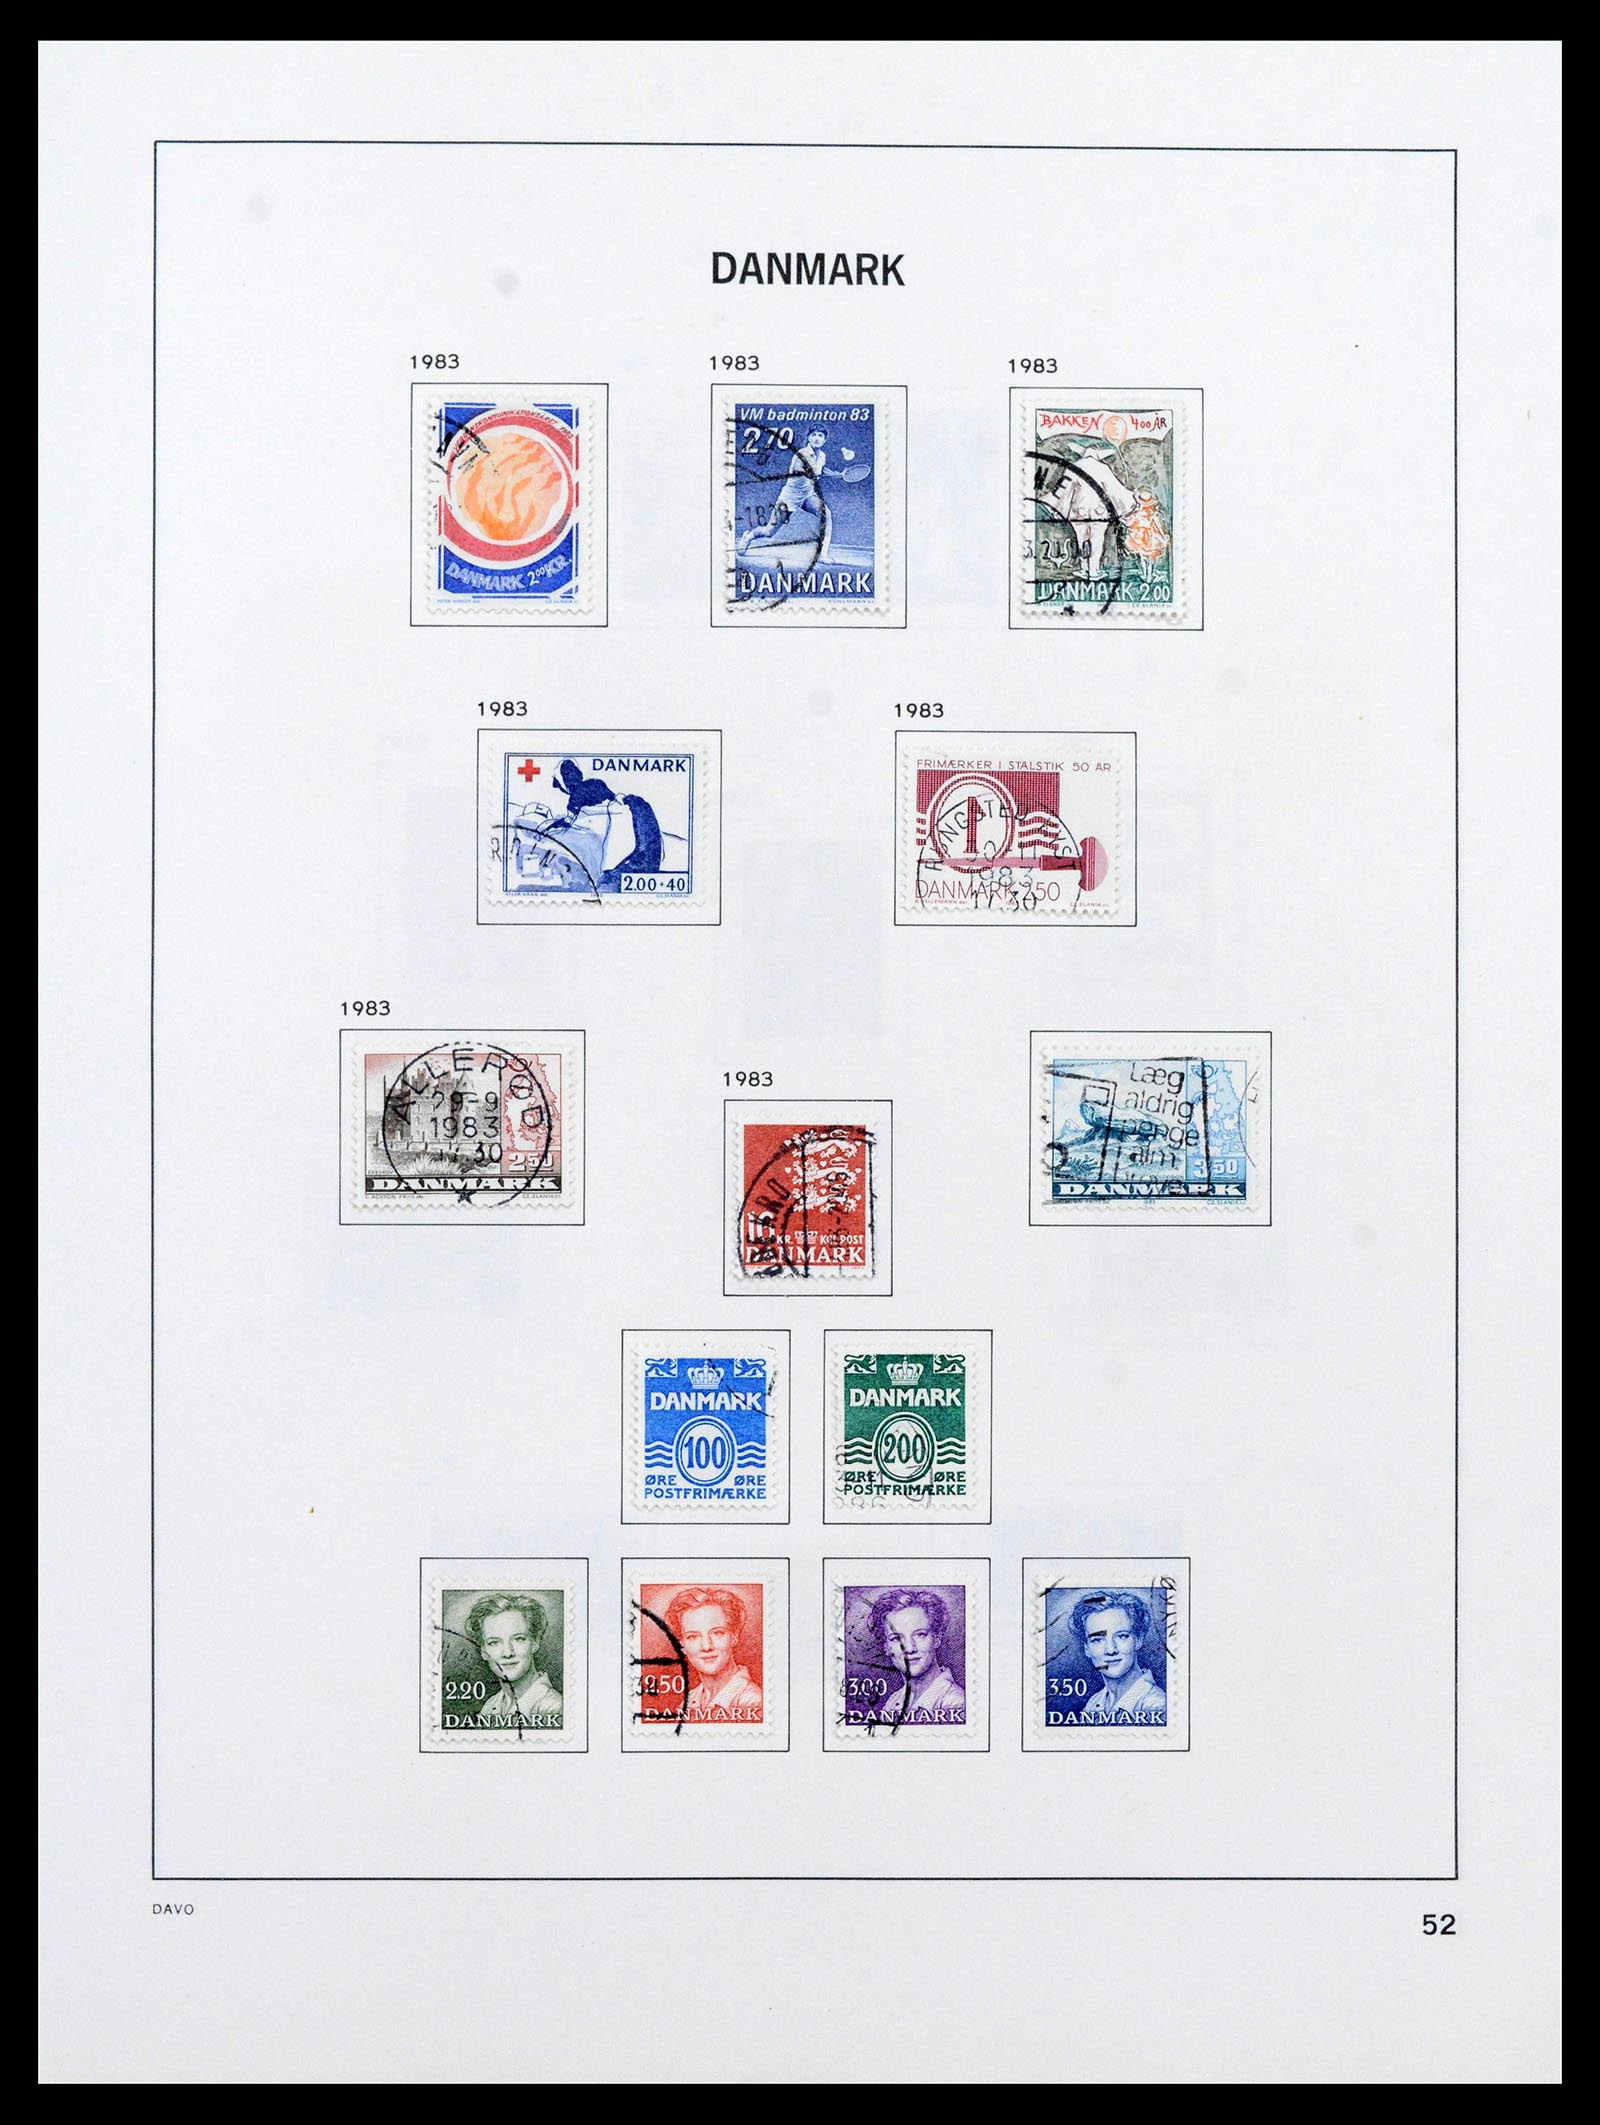 39428 0054 - Stamp collection 39428 Denmark 1851-2019.